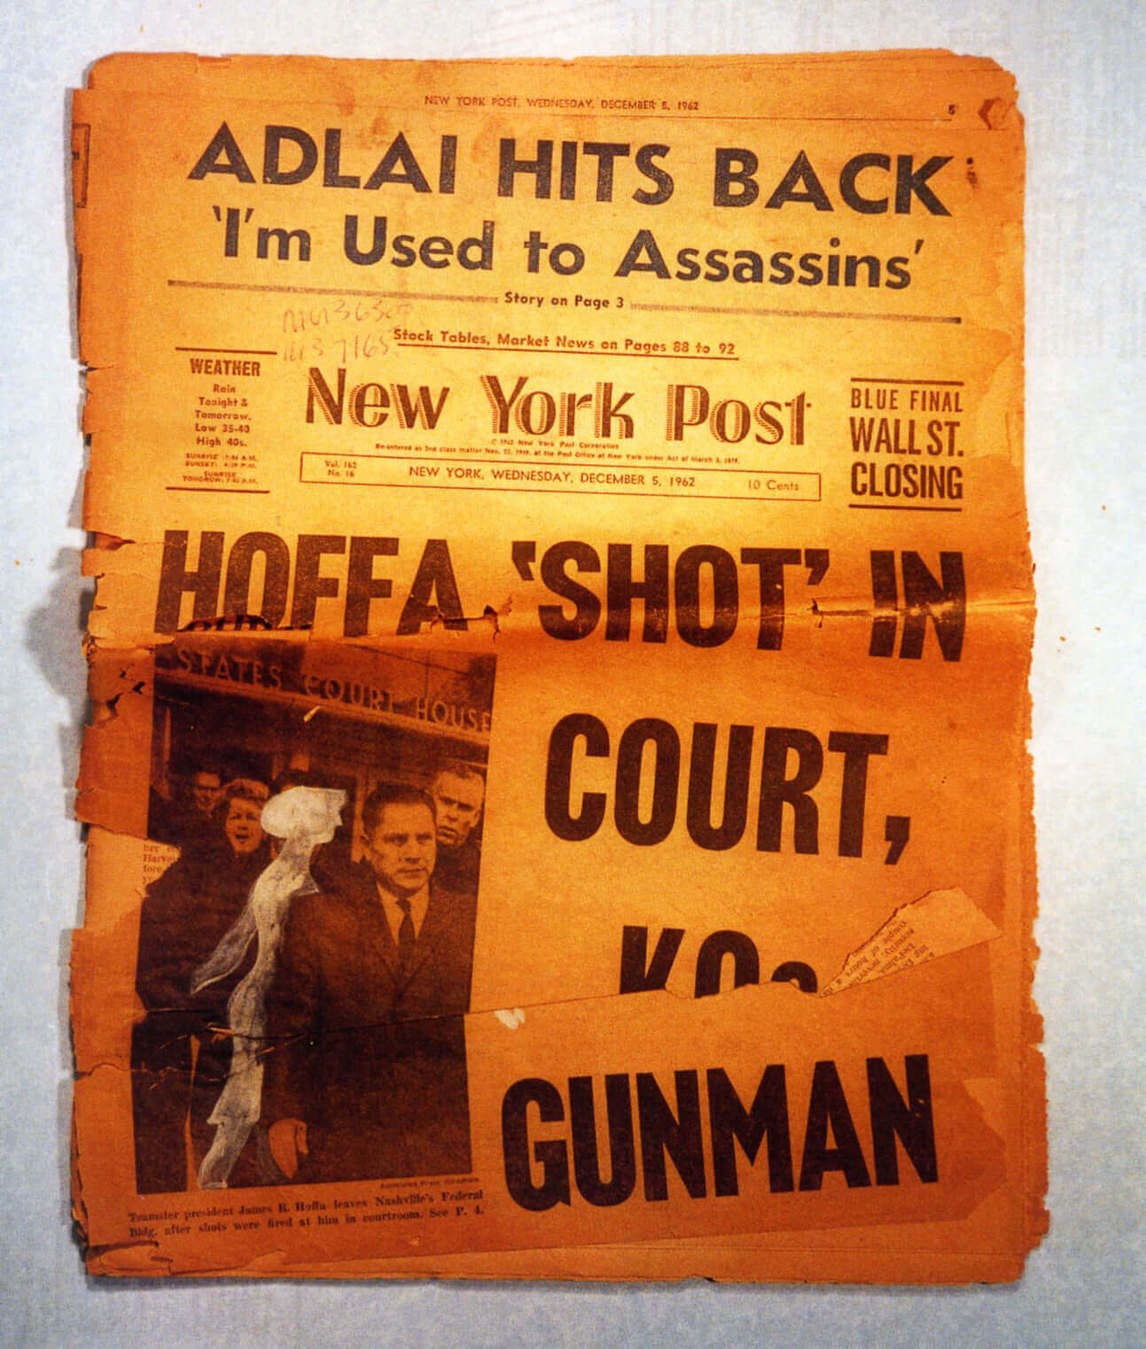 Art Canada Institute, Michael Snow, Altered front page of the New York Post, 1962